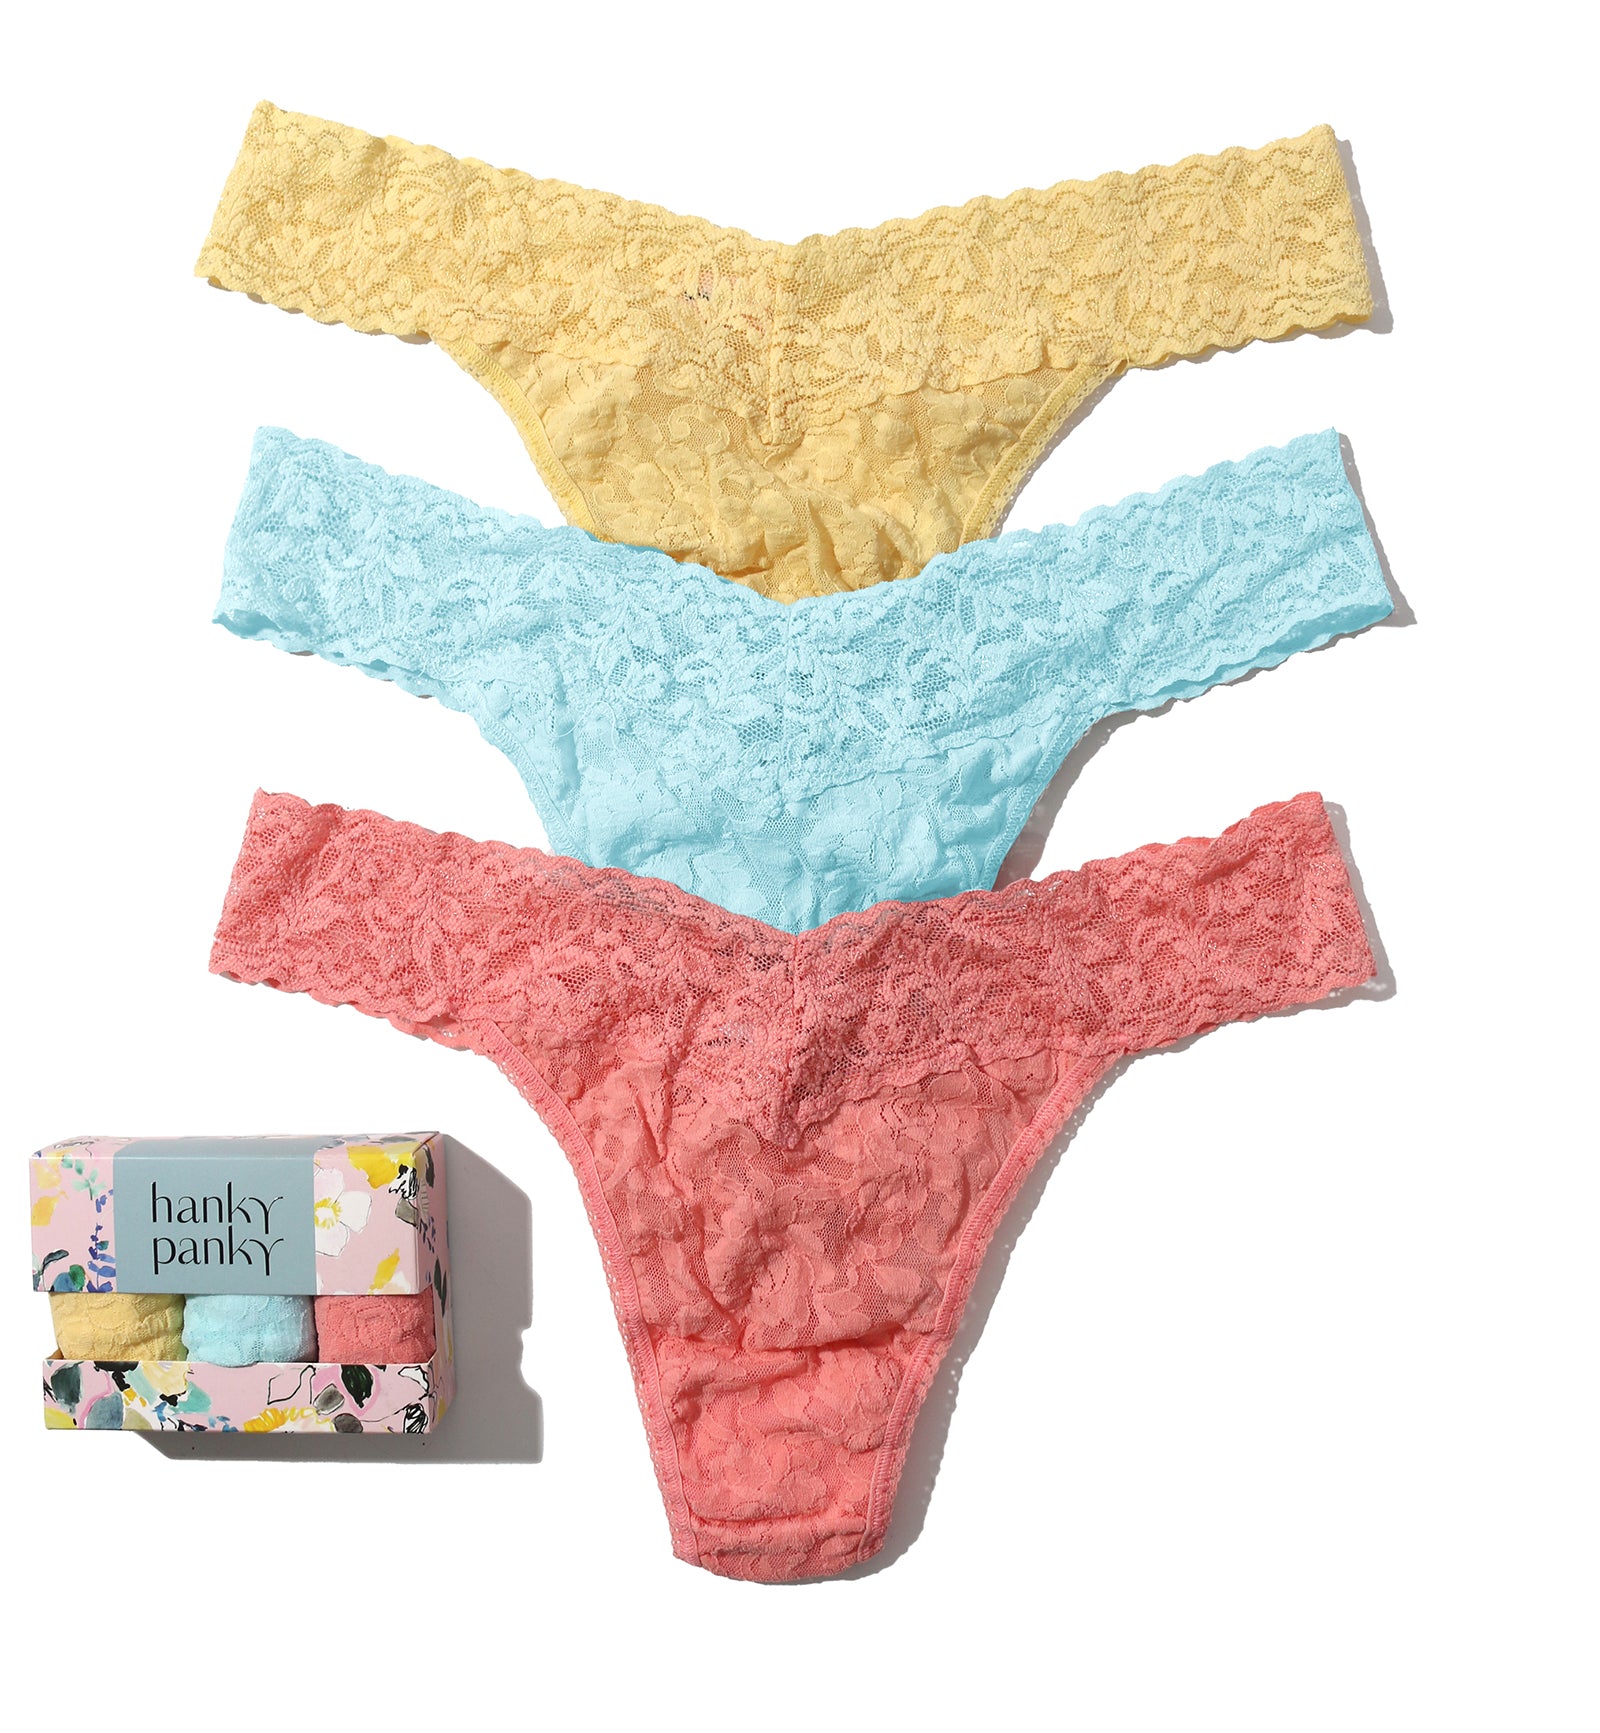 Hanky Panky 3-PACK Signature Lace Original Rise Thong PLUS (48113XPK),Cannes You Believe It - Cannes You Believe It,One Size